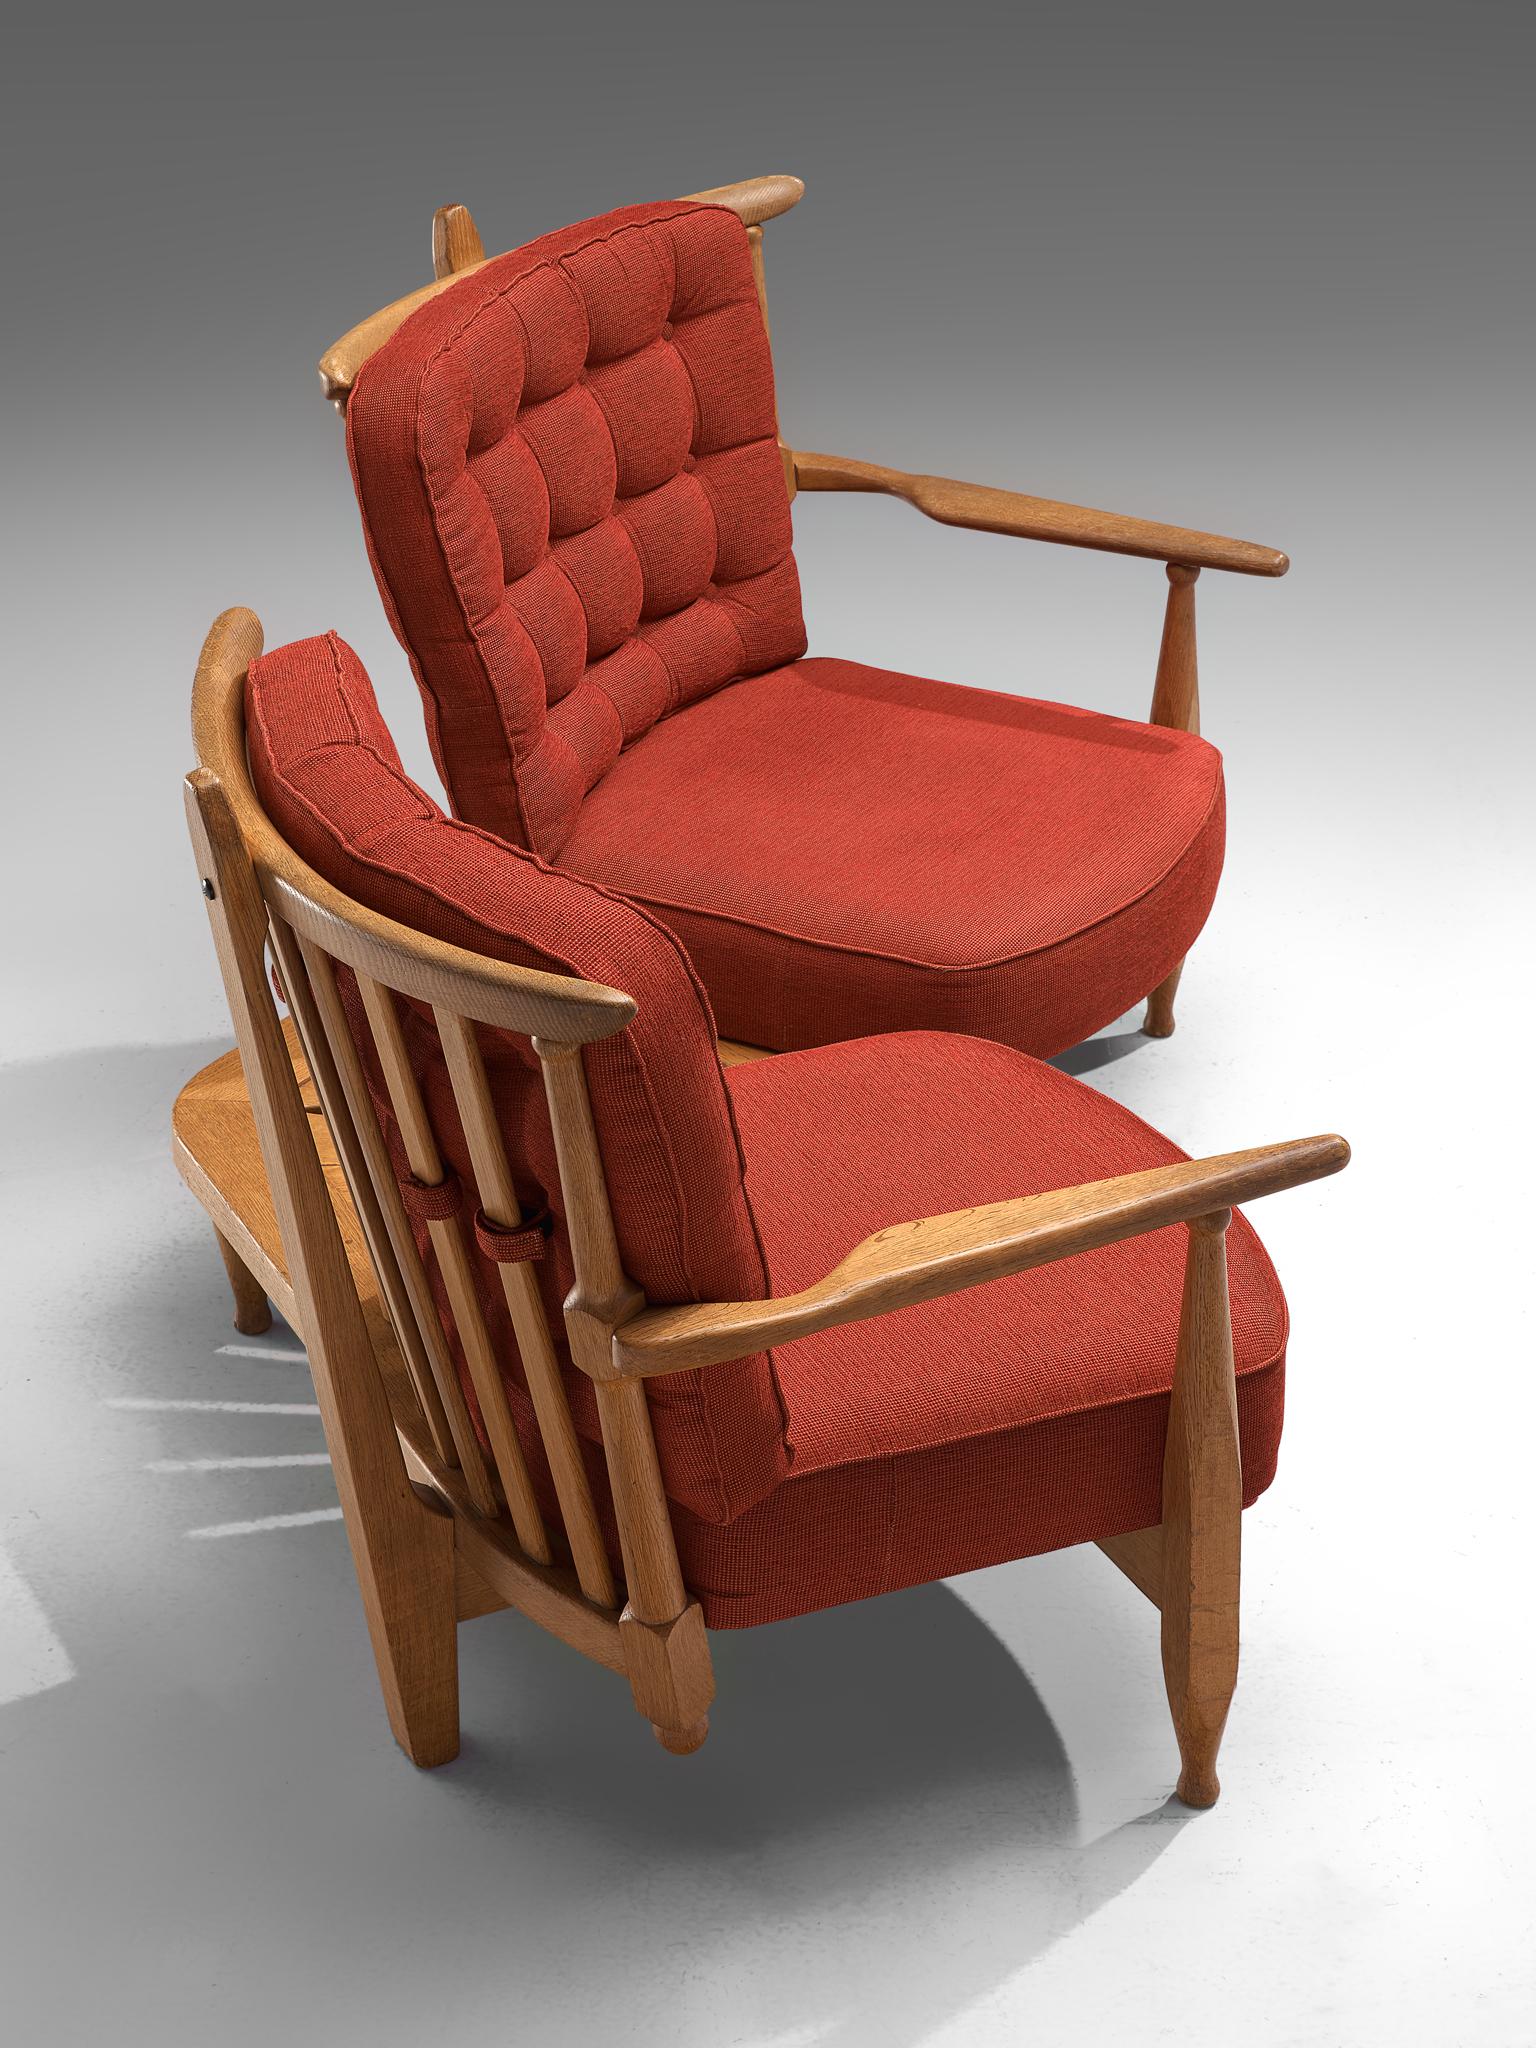 Guillerme et Chambron for Votre Maison, lounge chairs in oak, red upholstery, France, 1940s.

Guillerme and Chambron are known for their high quality solid oak furniture, from which this piece is another great example. The curved slatted back is an